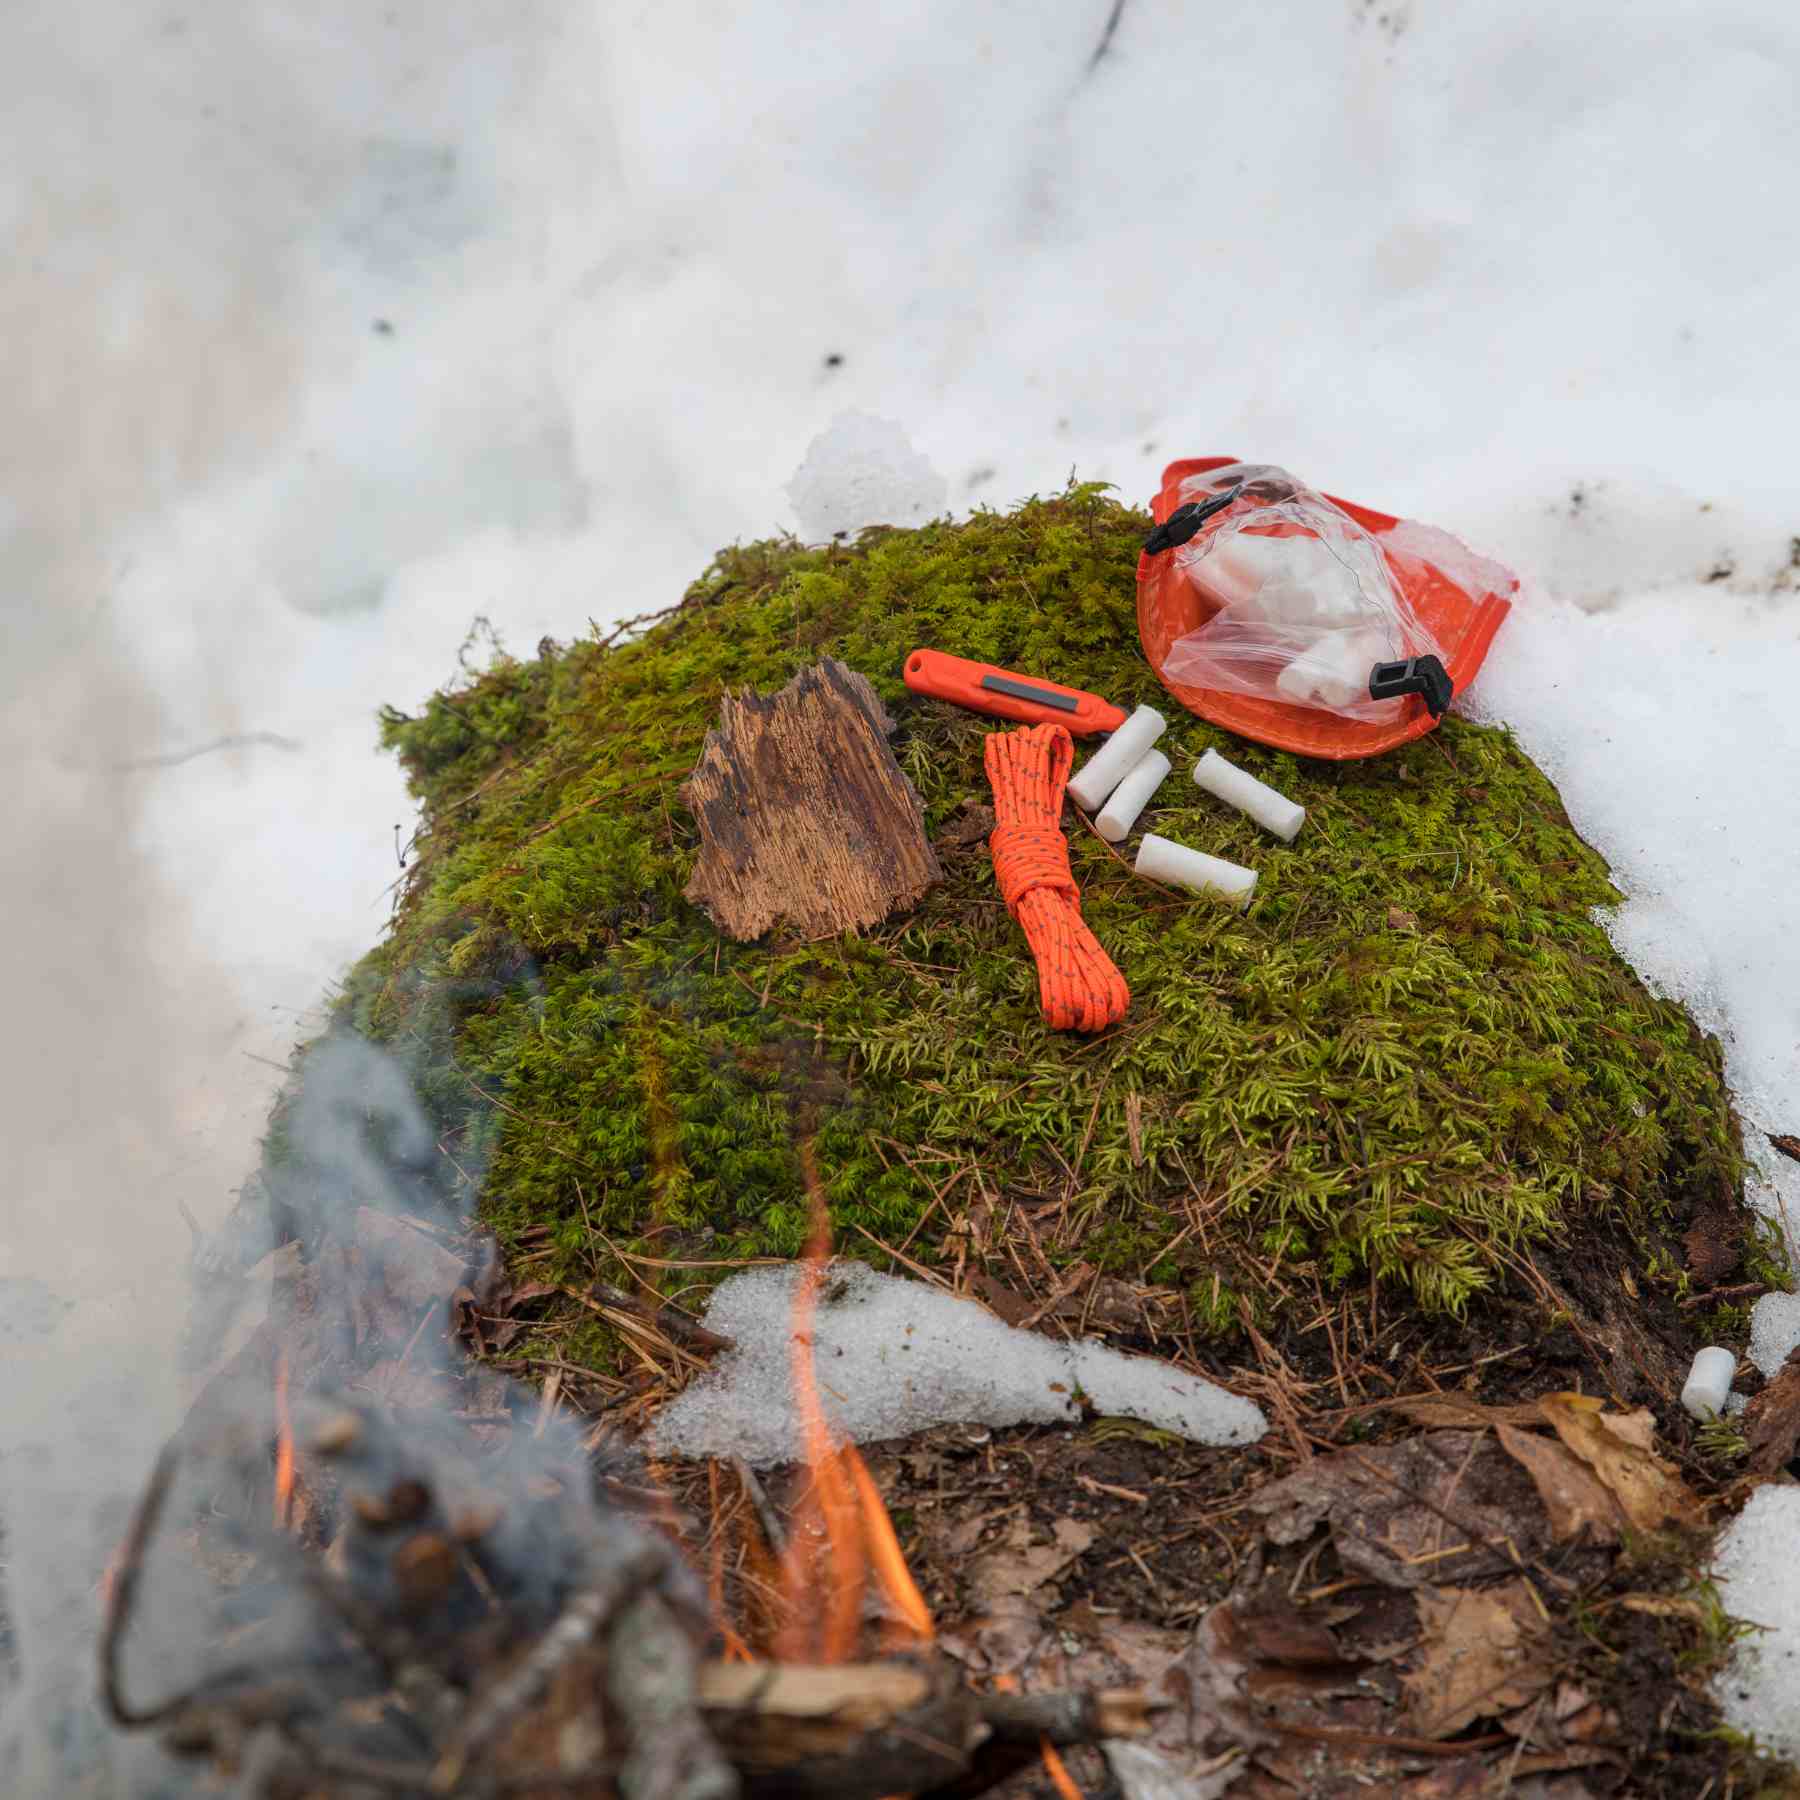 Fire Lite Kit in Dry Bag kit and kit contents on mossy rock with snow around it